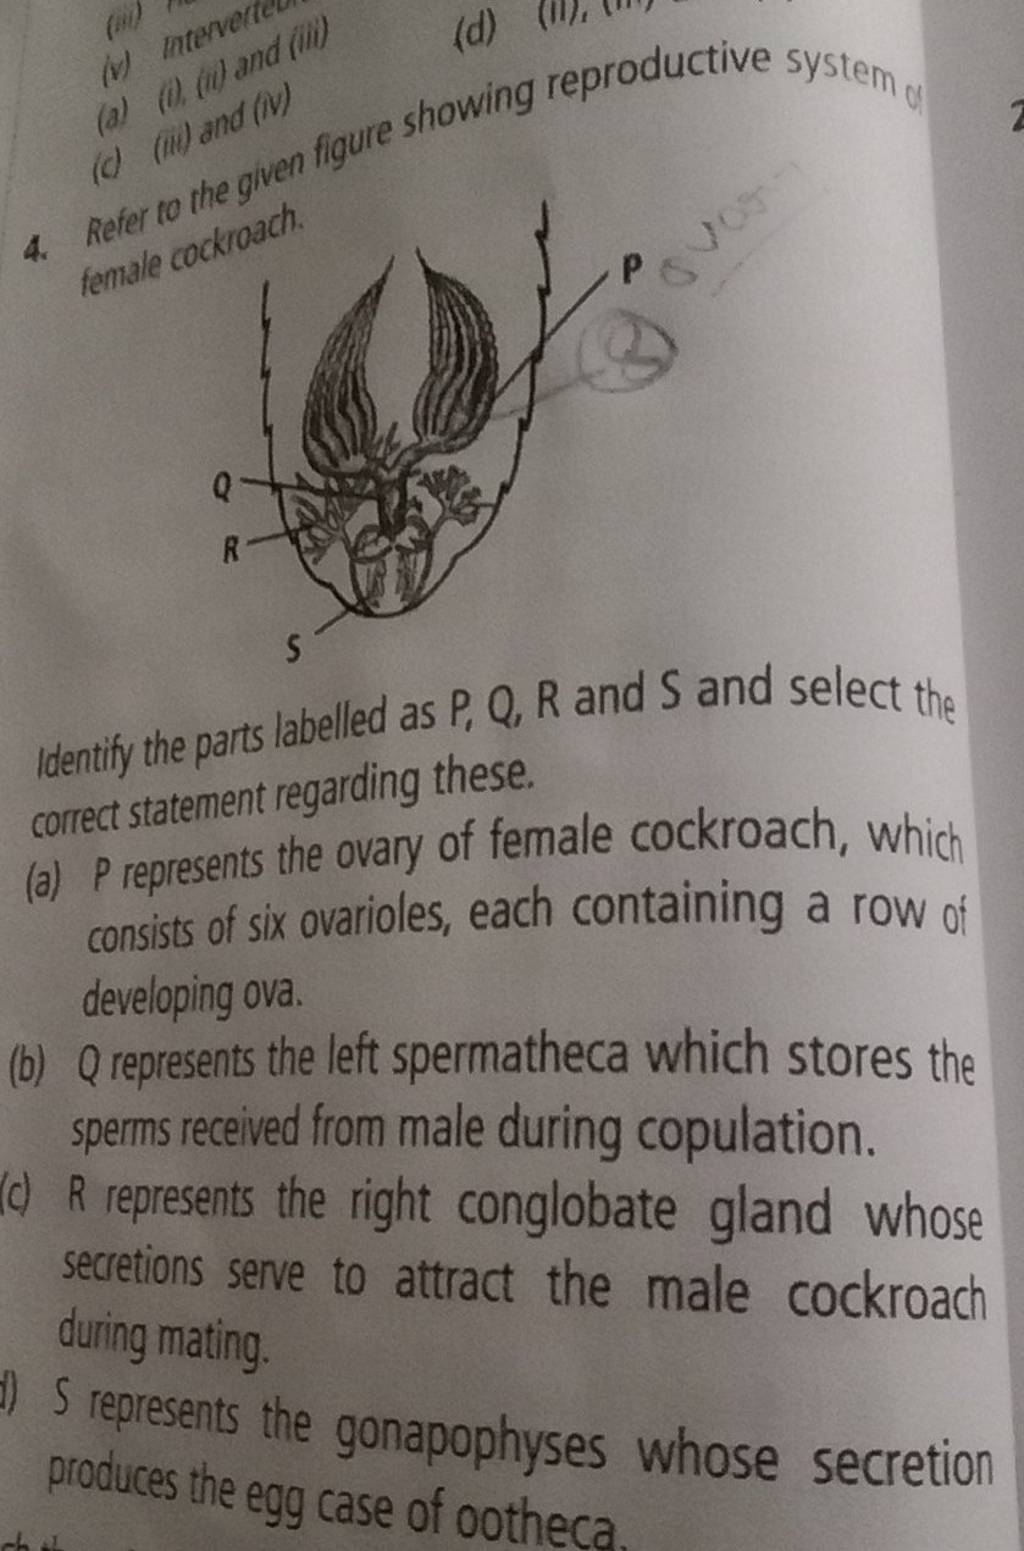 4. Refer to the given figure showing reproductive system female cockroach..